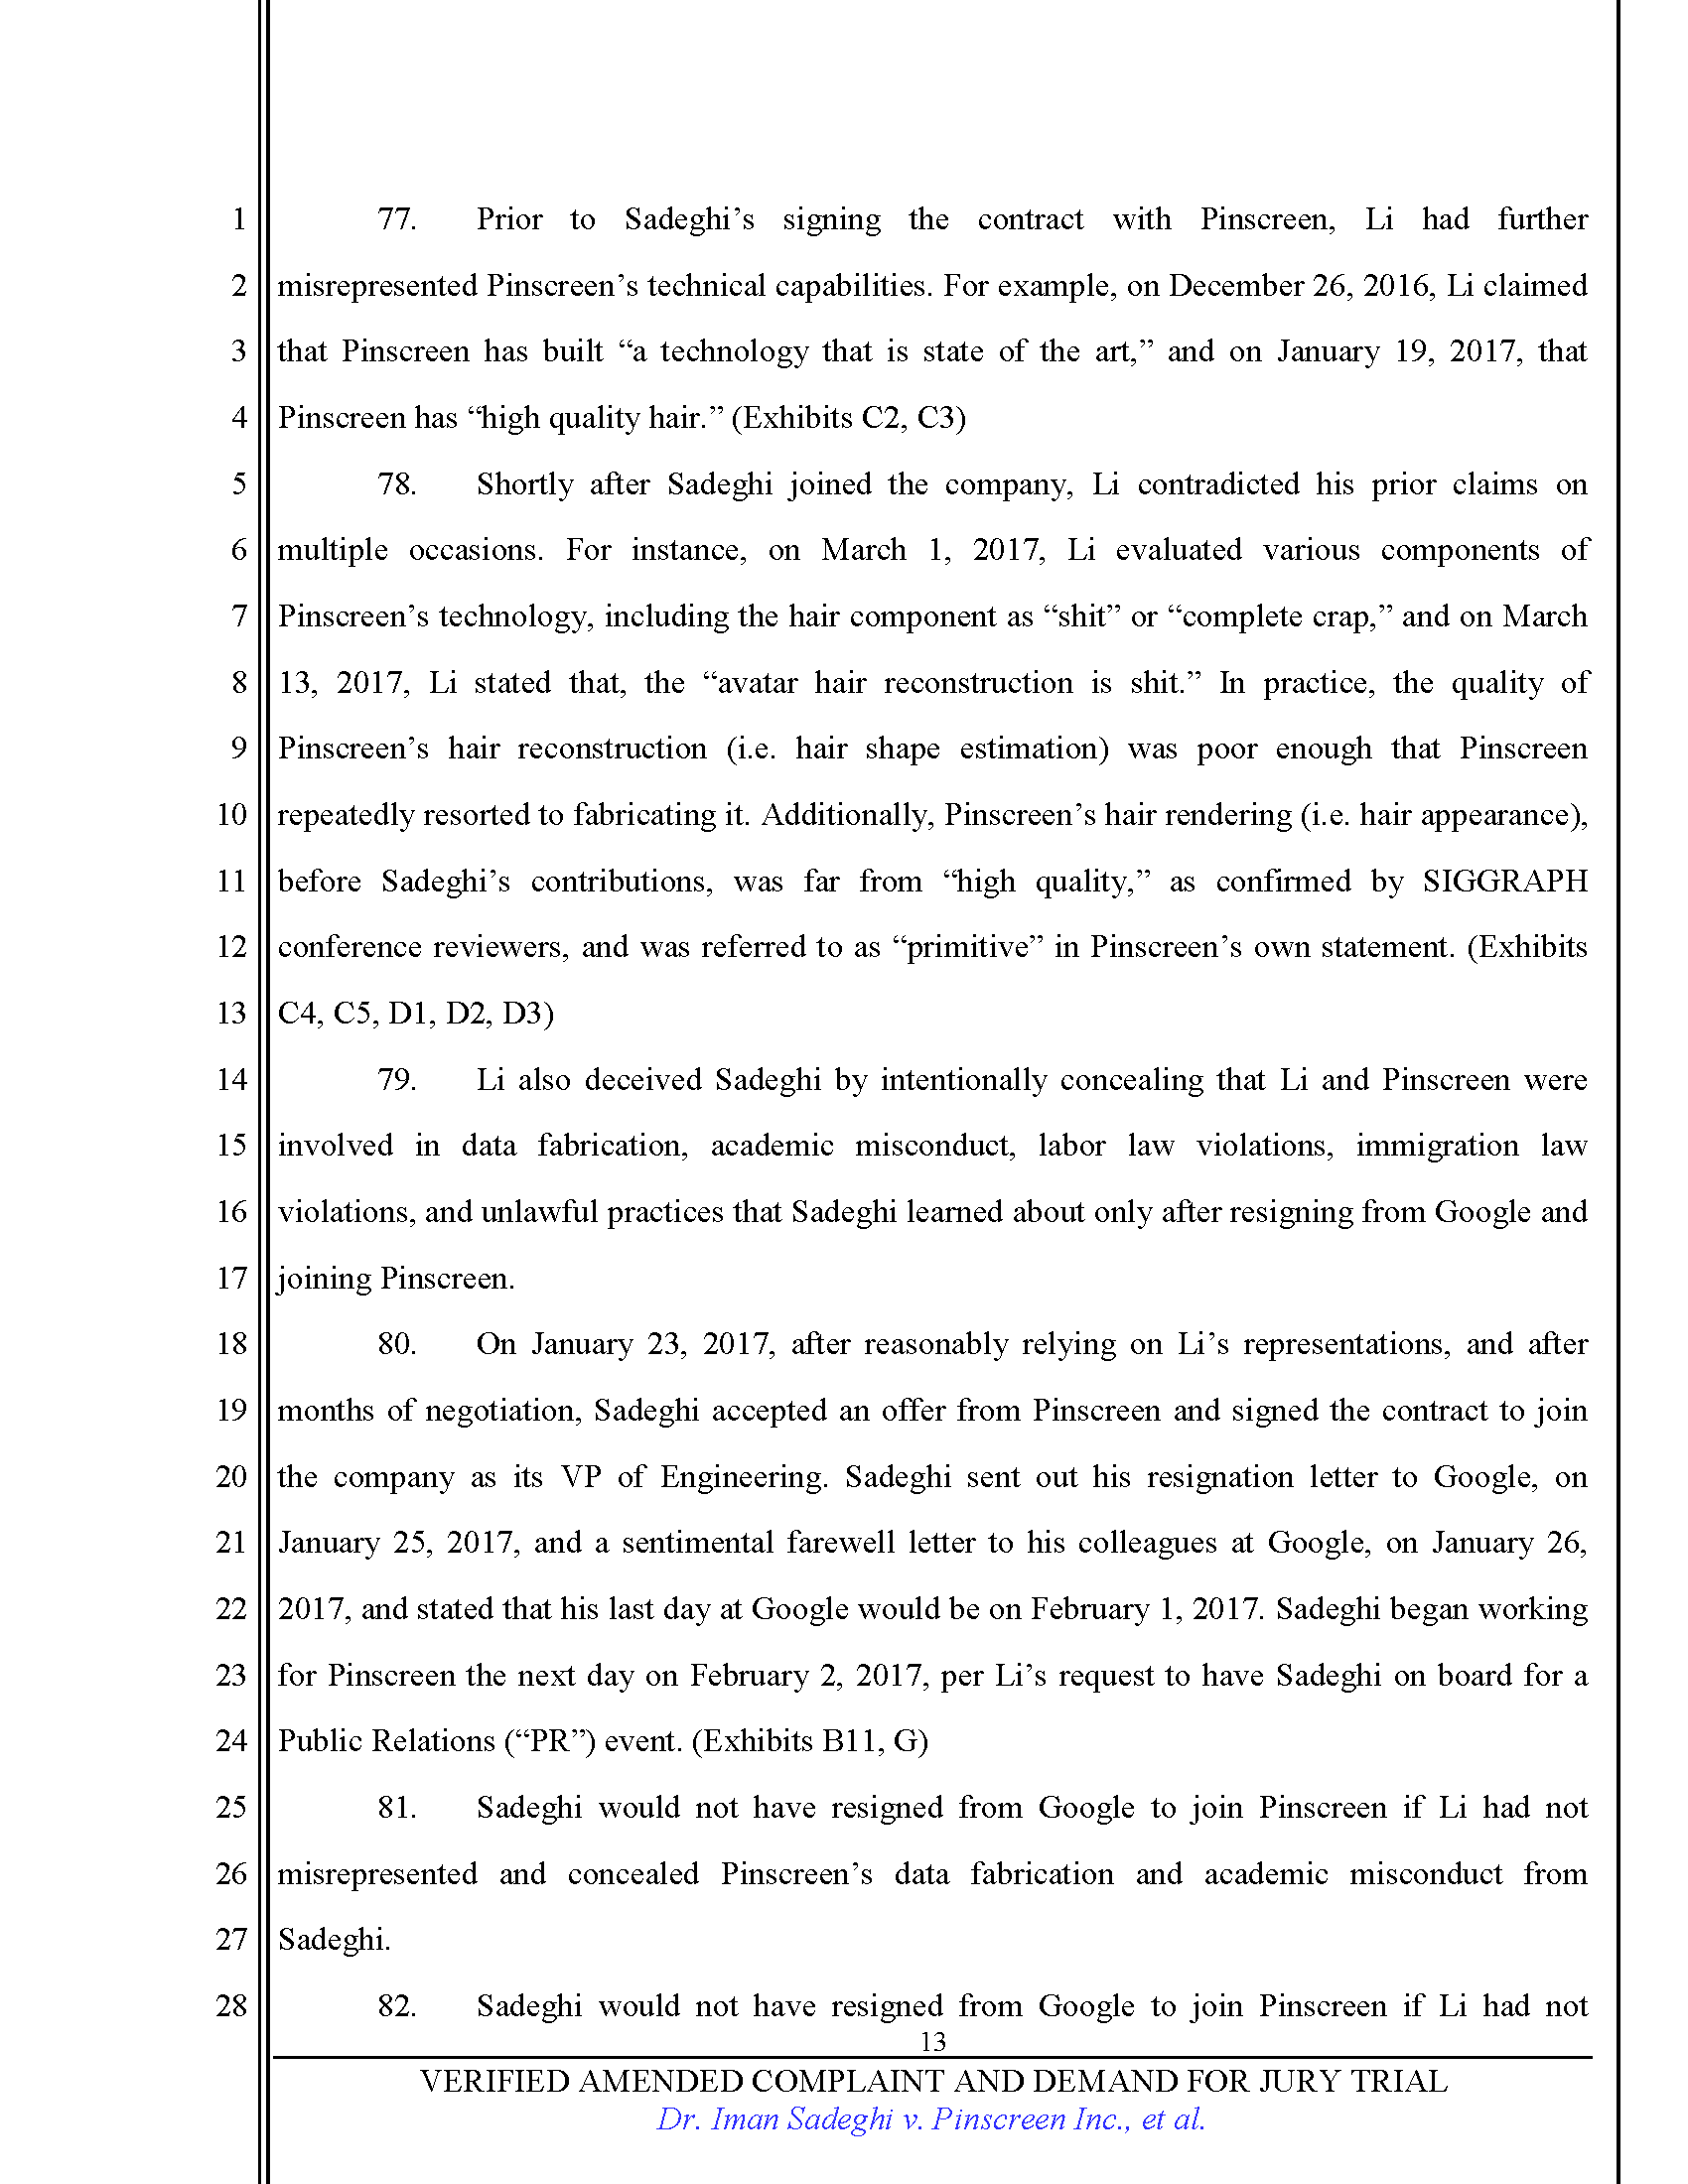 First Amended Complaint (FAC) Page 13